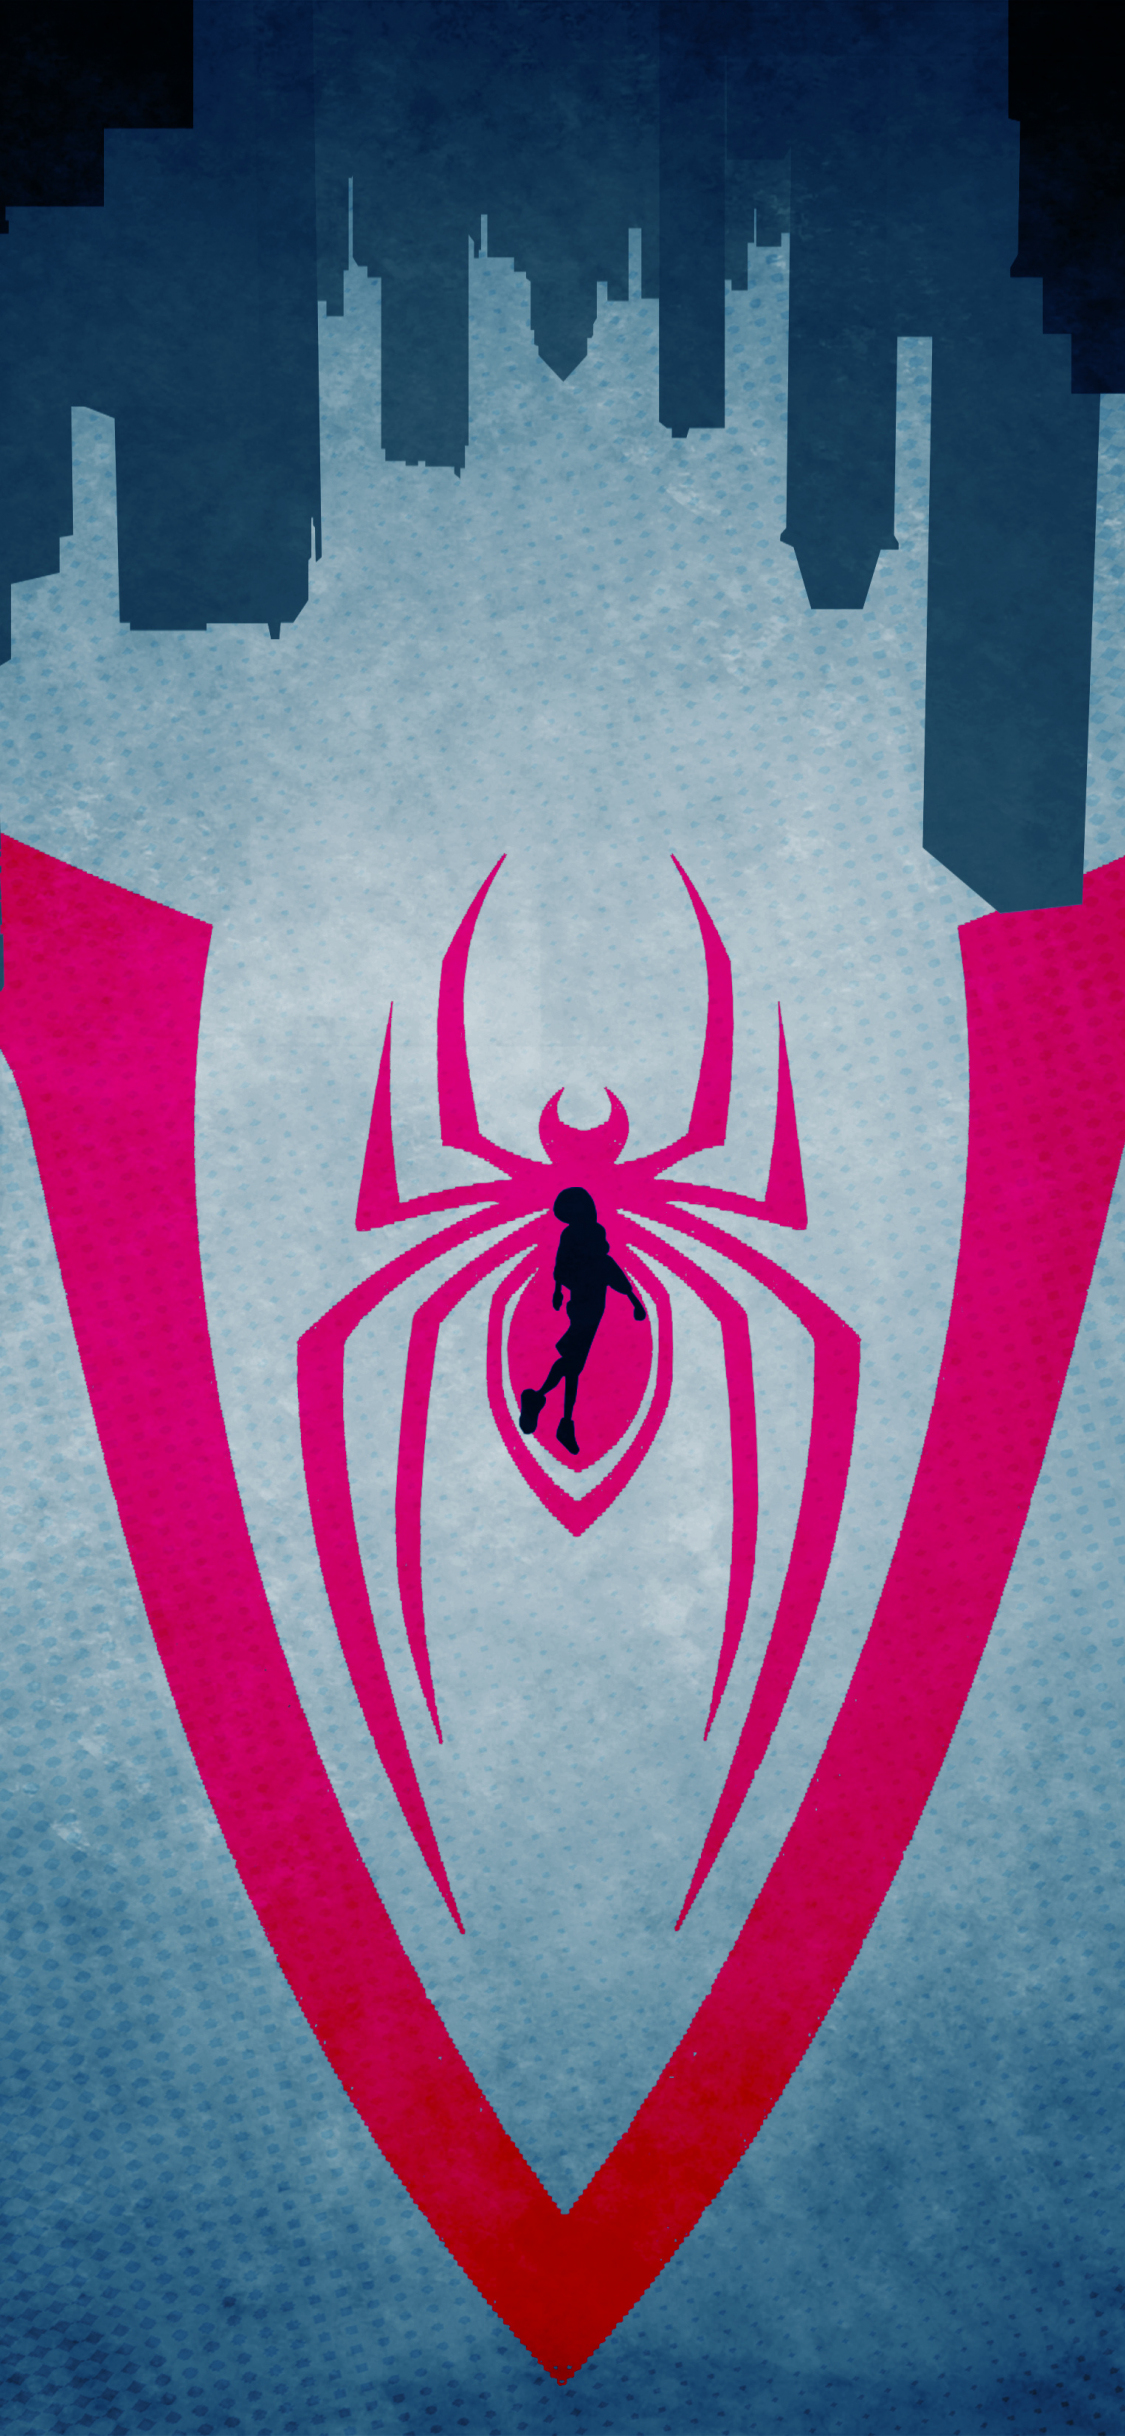 Download 1125x2436 Wallpaper Spider Man Into The Spider